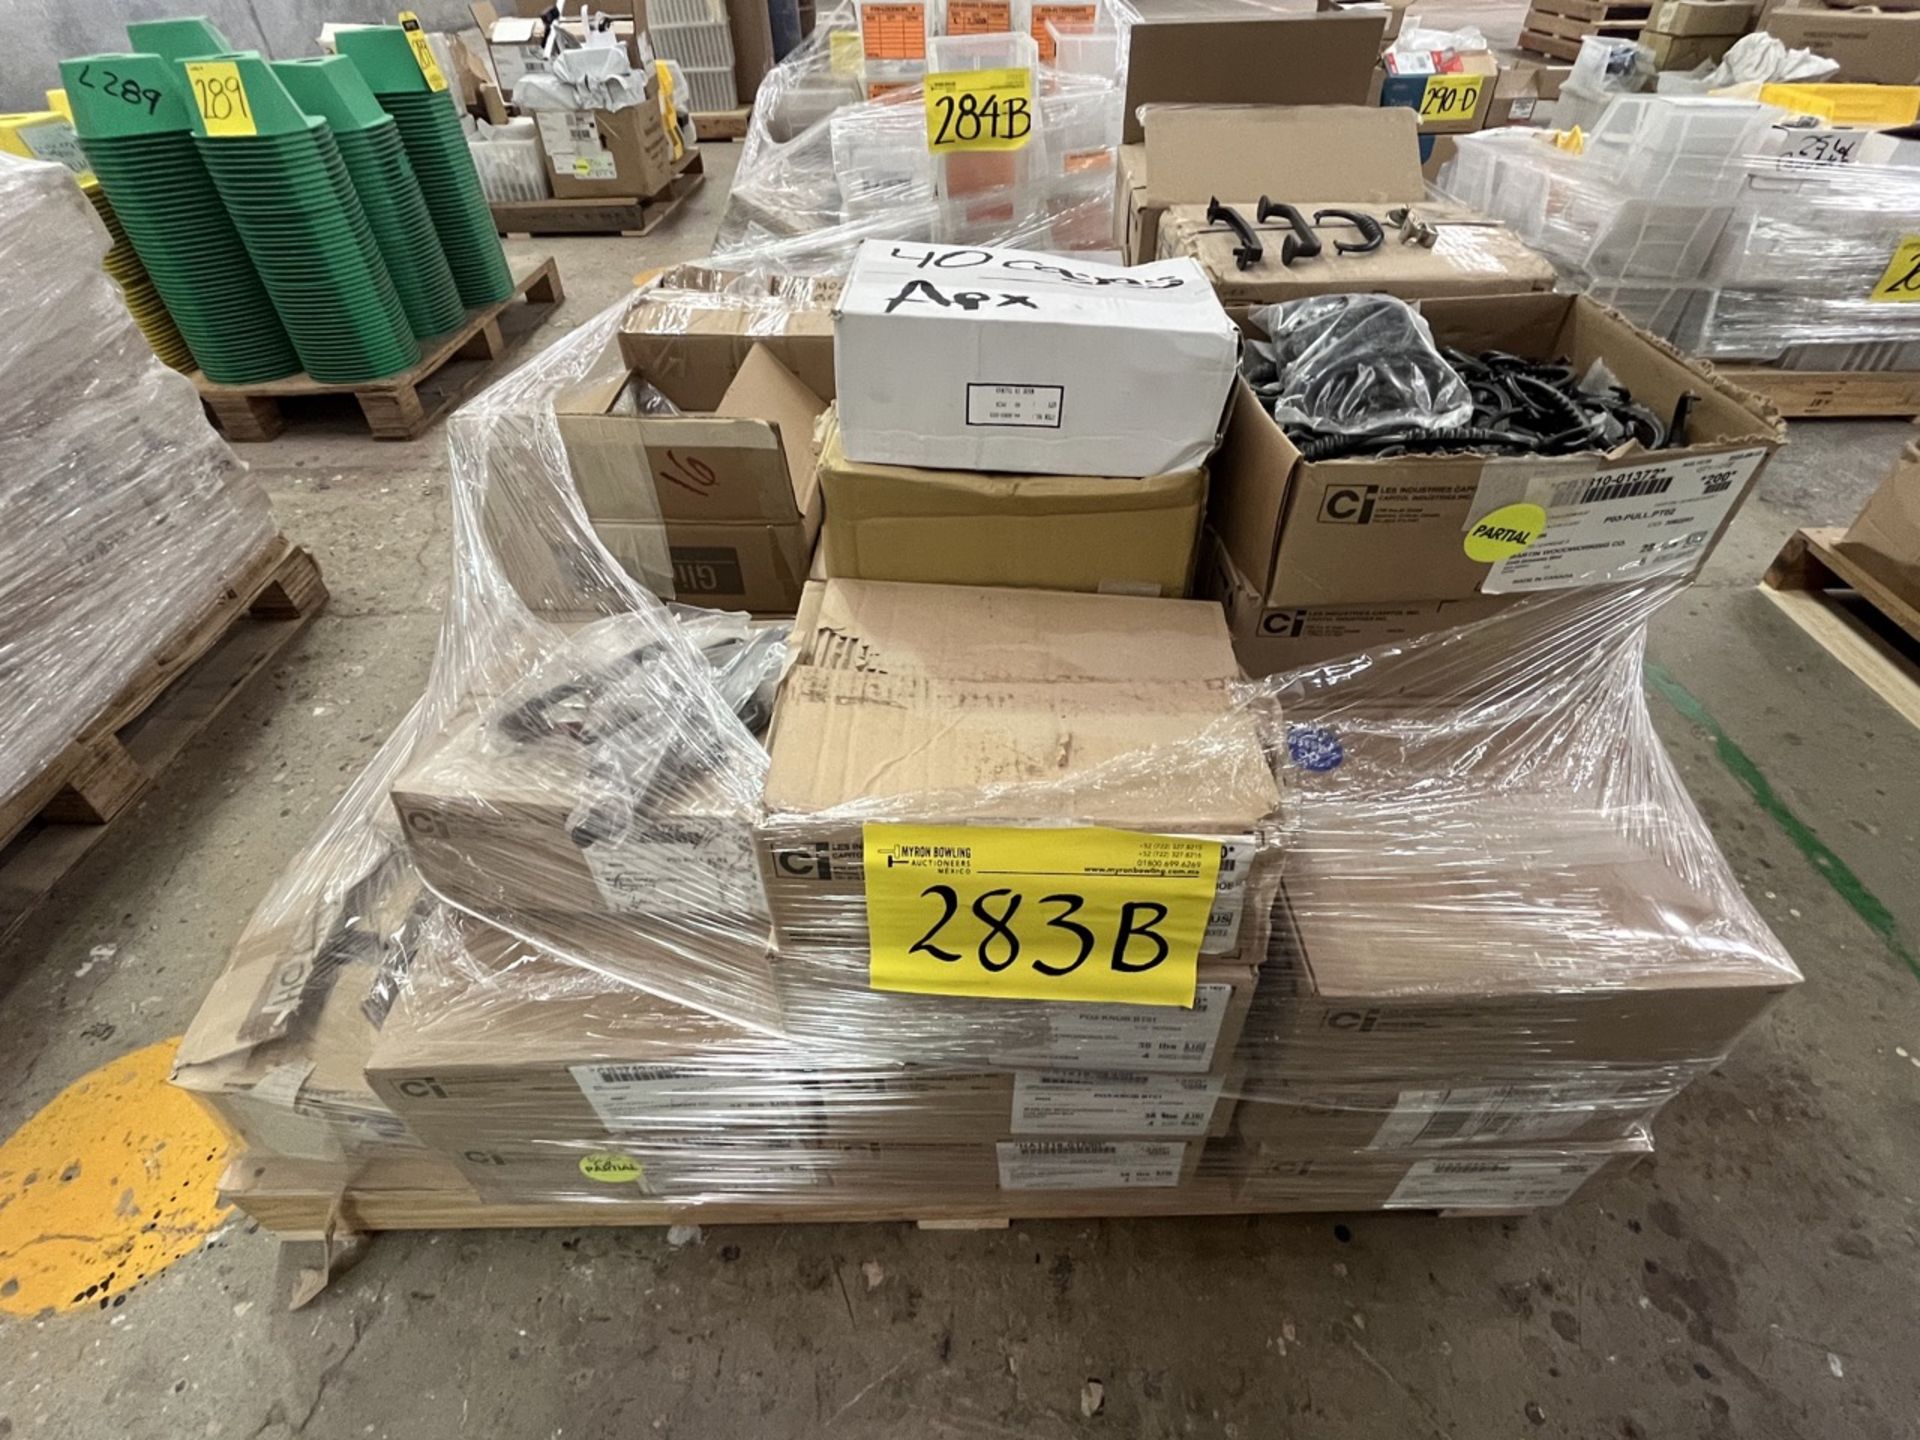 (NEW) Pallet with 40 boxes of pullers of different sizes and models, please inspect. / (NUEVO) Tari